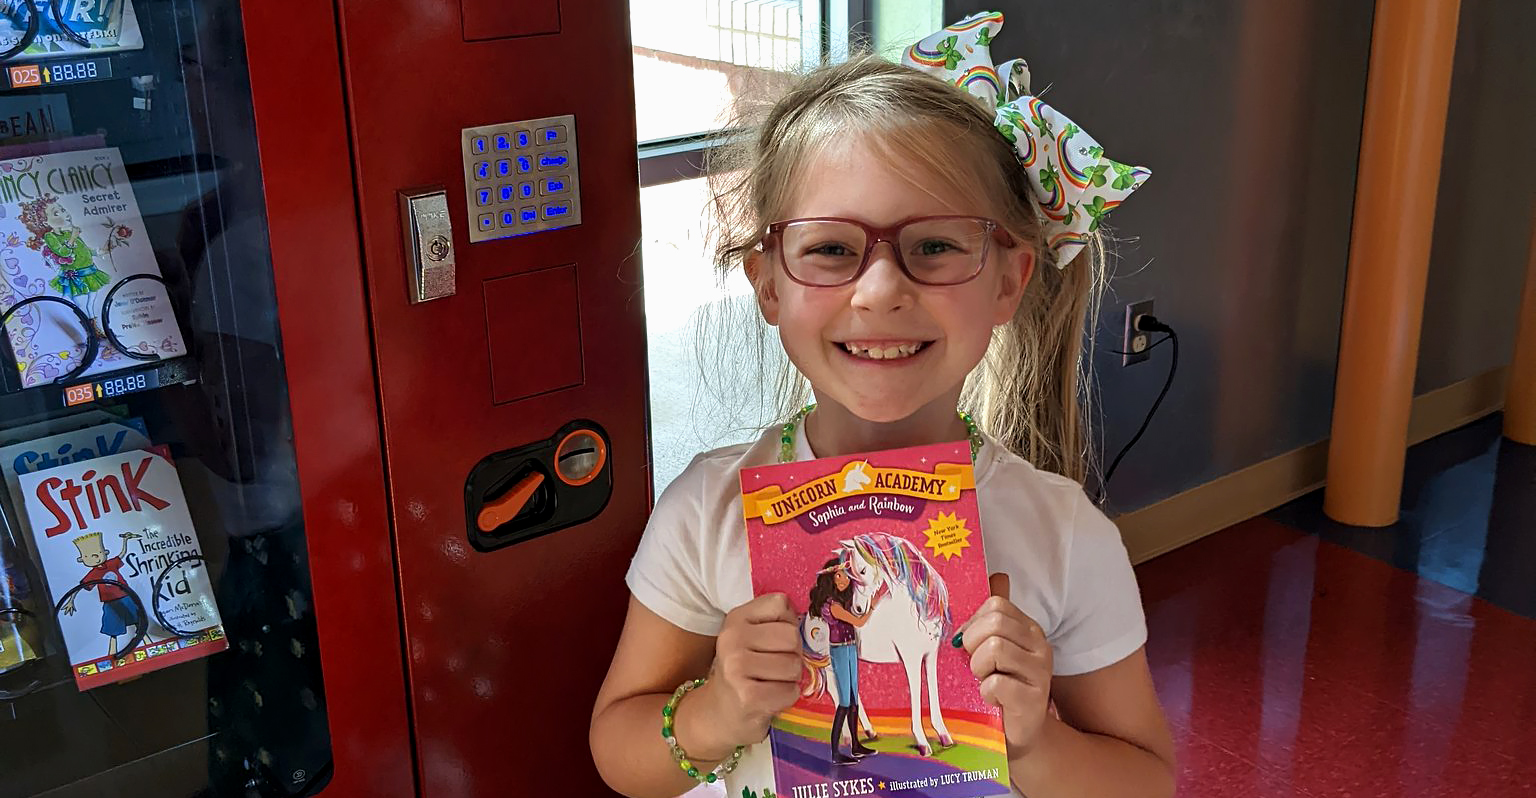 Girl receiving a book from the book vending machine